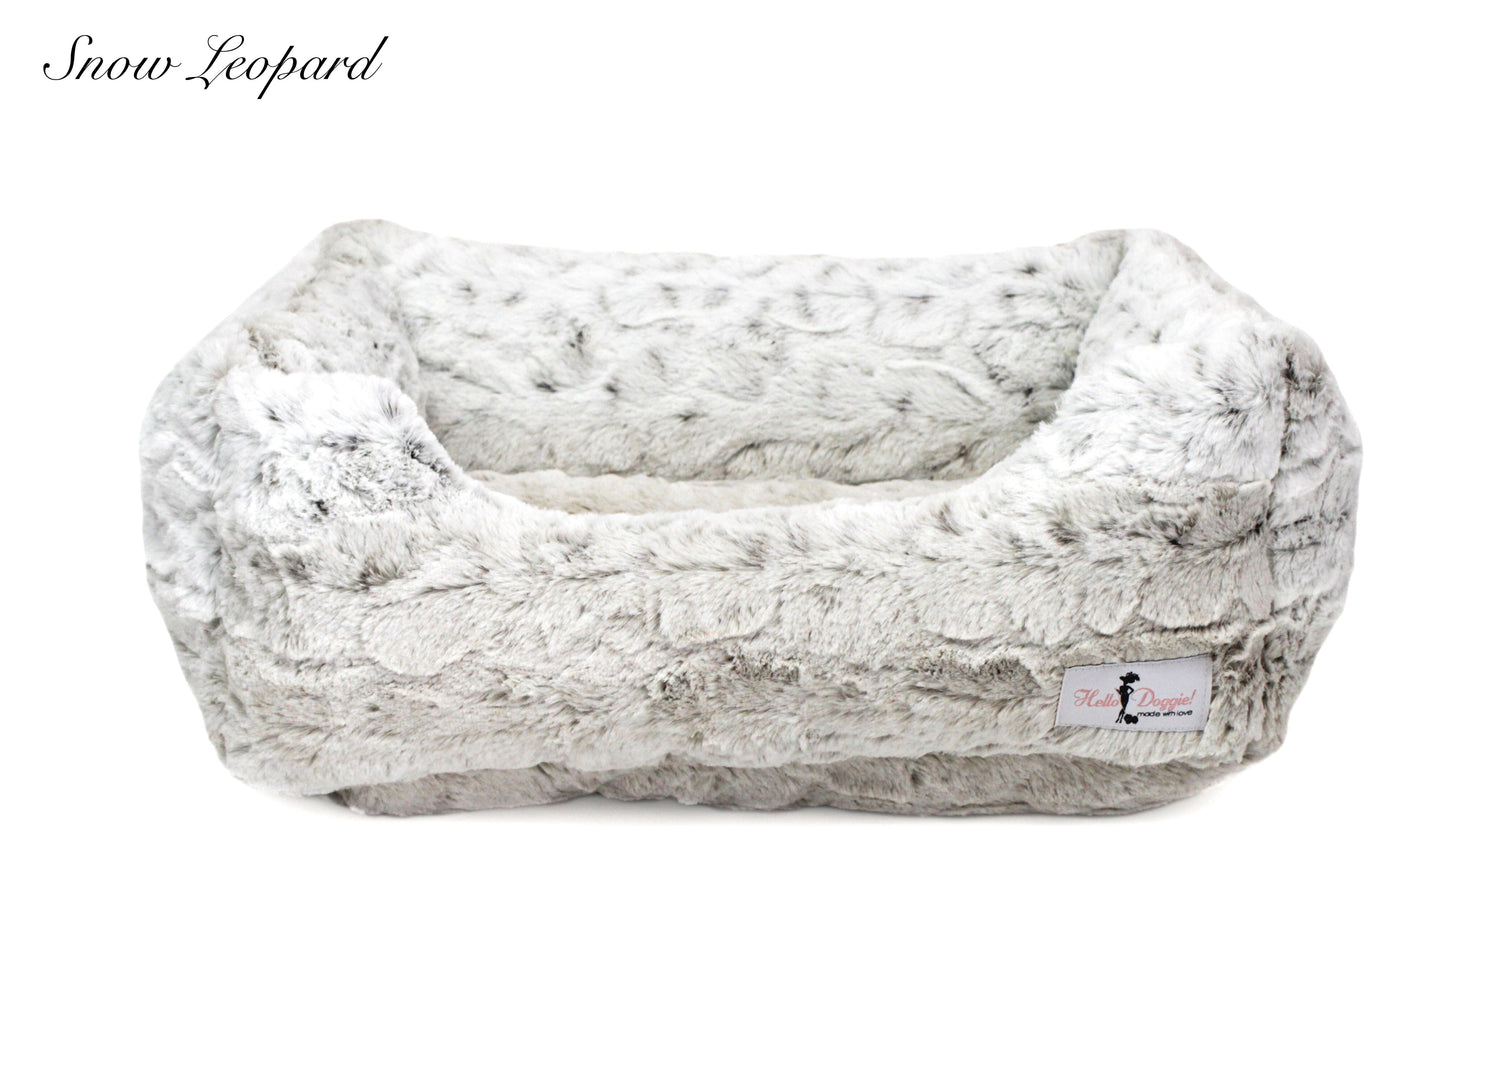 High quality snow leopard print dog bed